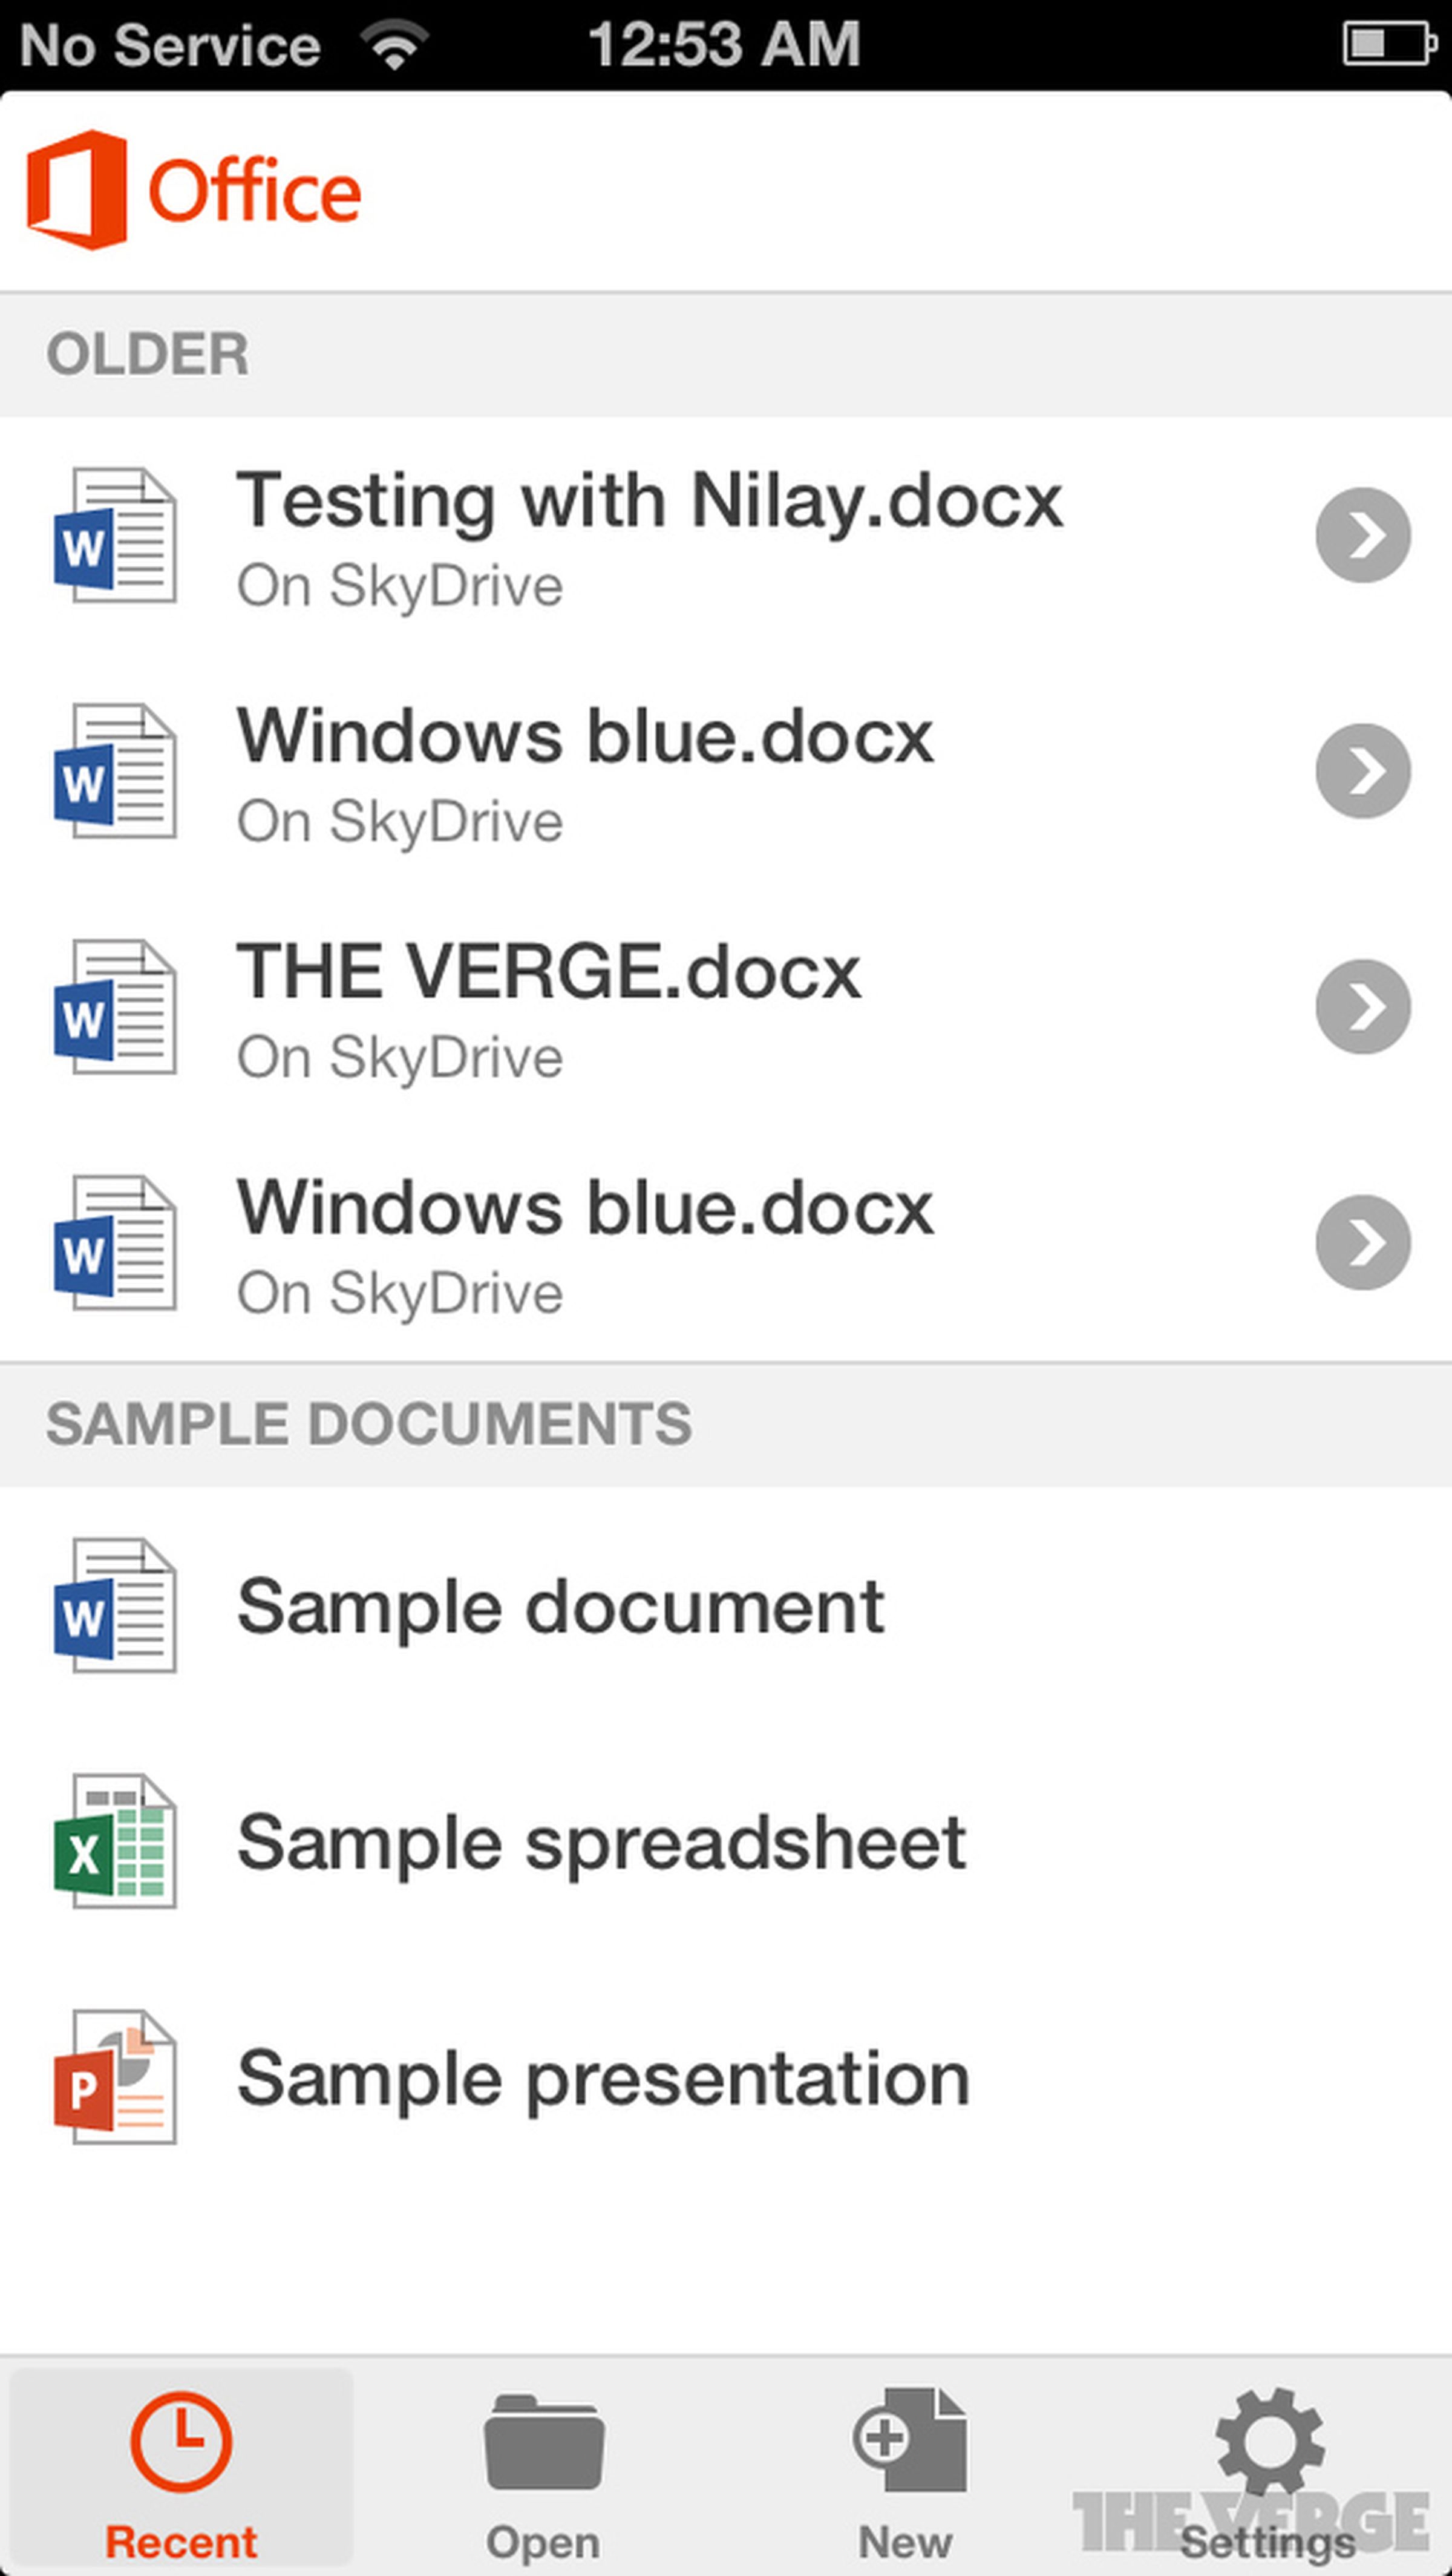 Office for iPhone screenshots